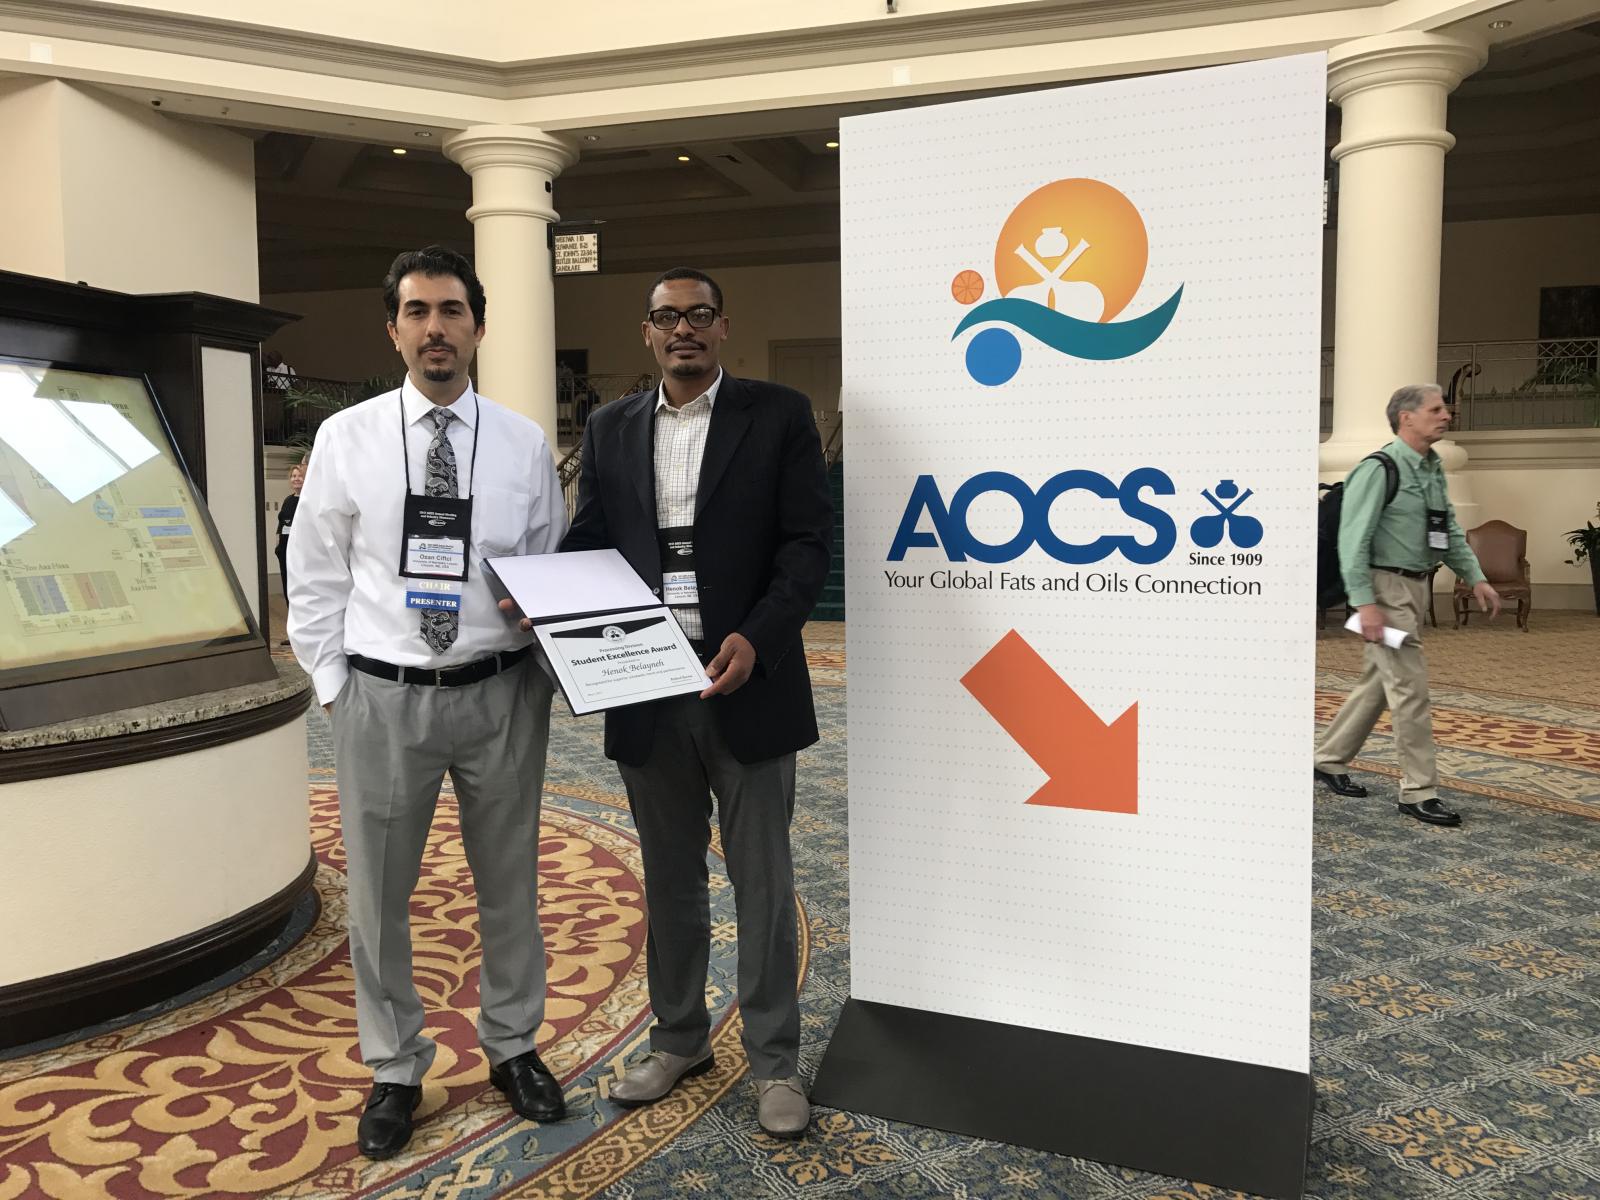  Dr. Ciftci and Henok at the 108th AOCS Annual Meeting and Expo in Orlando, FL.